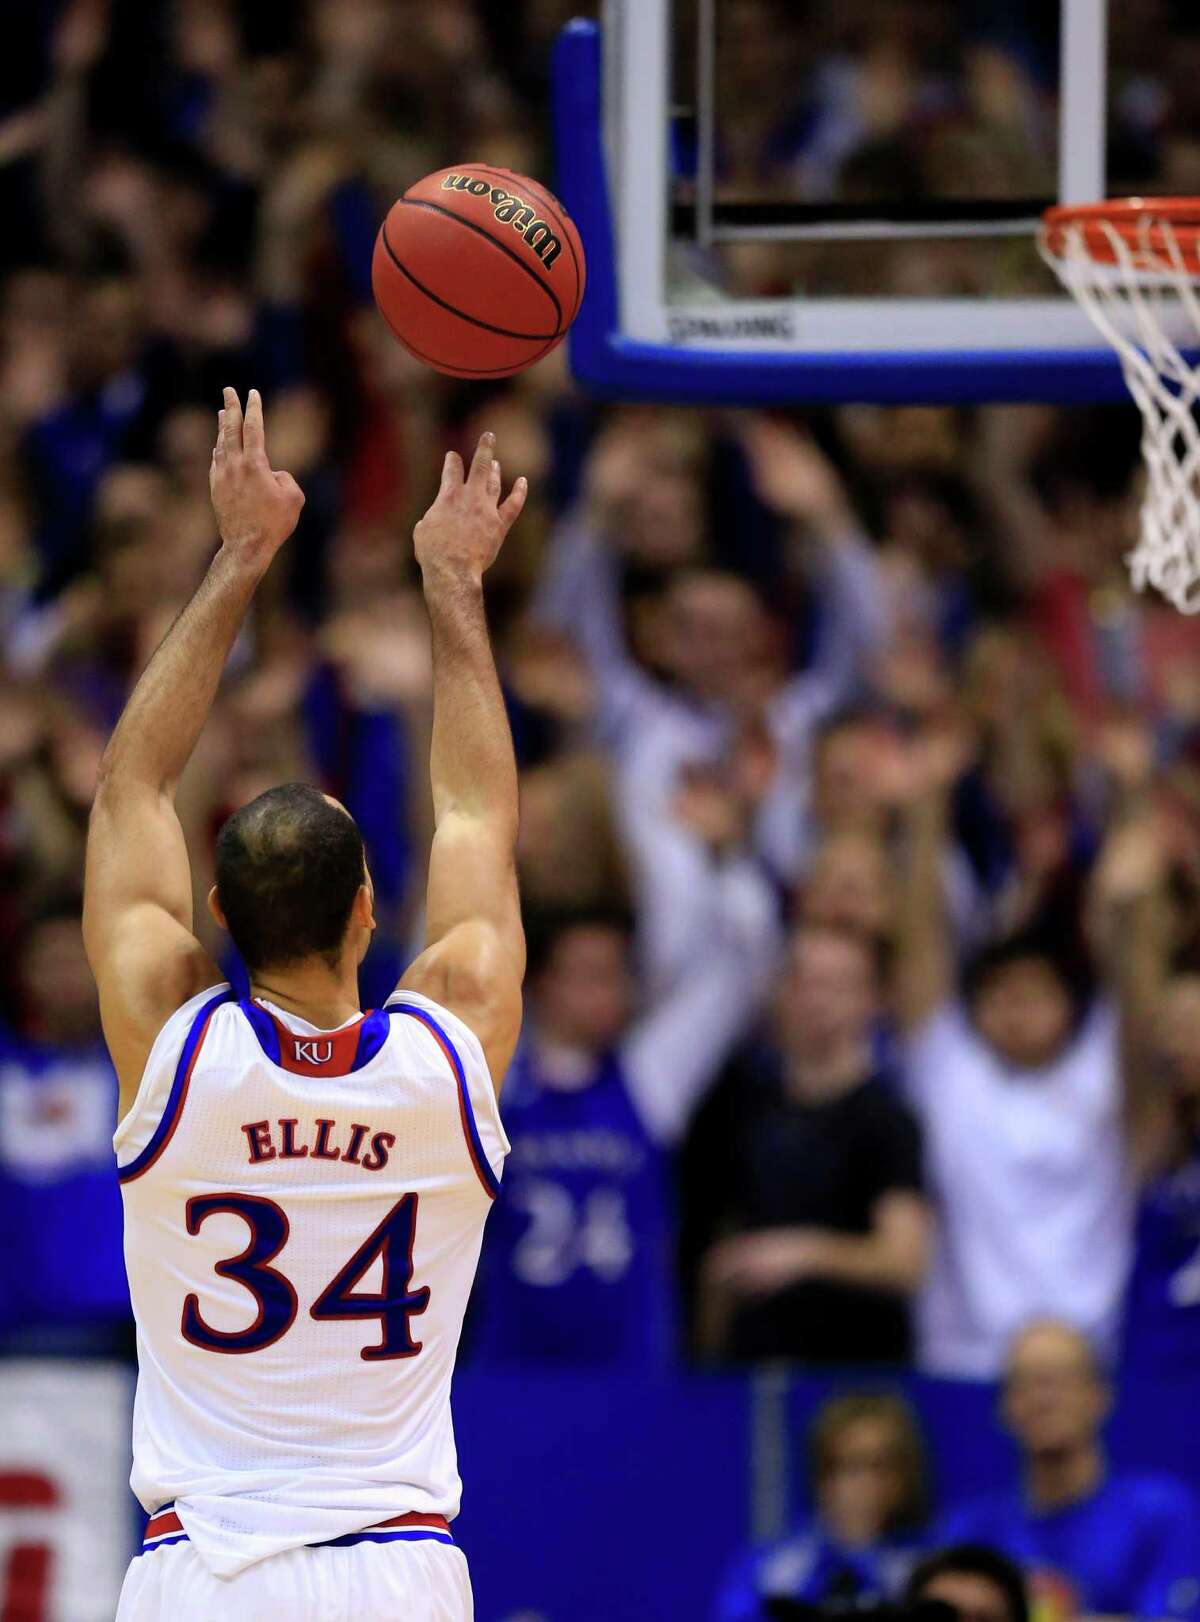 Kansas forward Perry Ellis (34) shoots a free throw late in the second half of an NCAA college basketball game against Texas in Lawrence, Kan., Saturday, Jan. 23, 2016. Ellis scored 26 points in the game. Kansas defeated Texas 76-67. (AP Photo/Orlin Wagner)